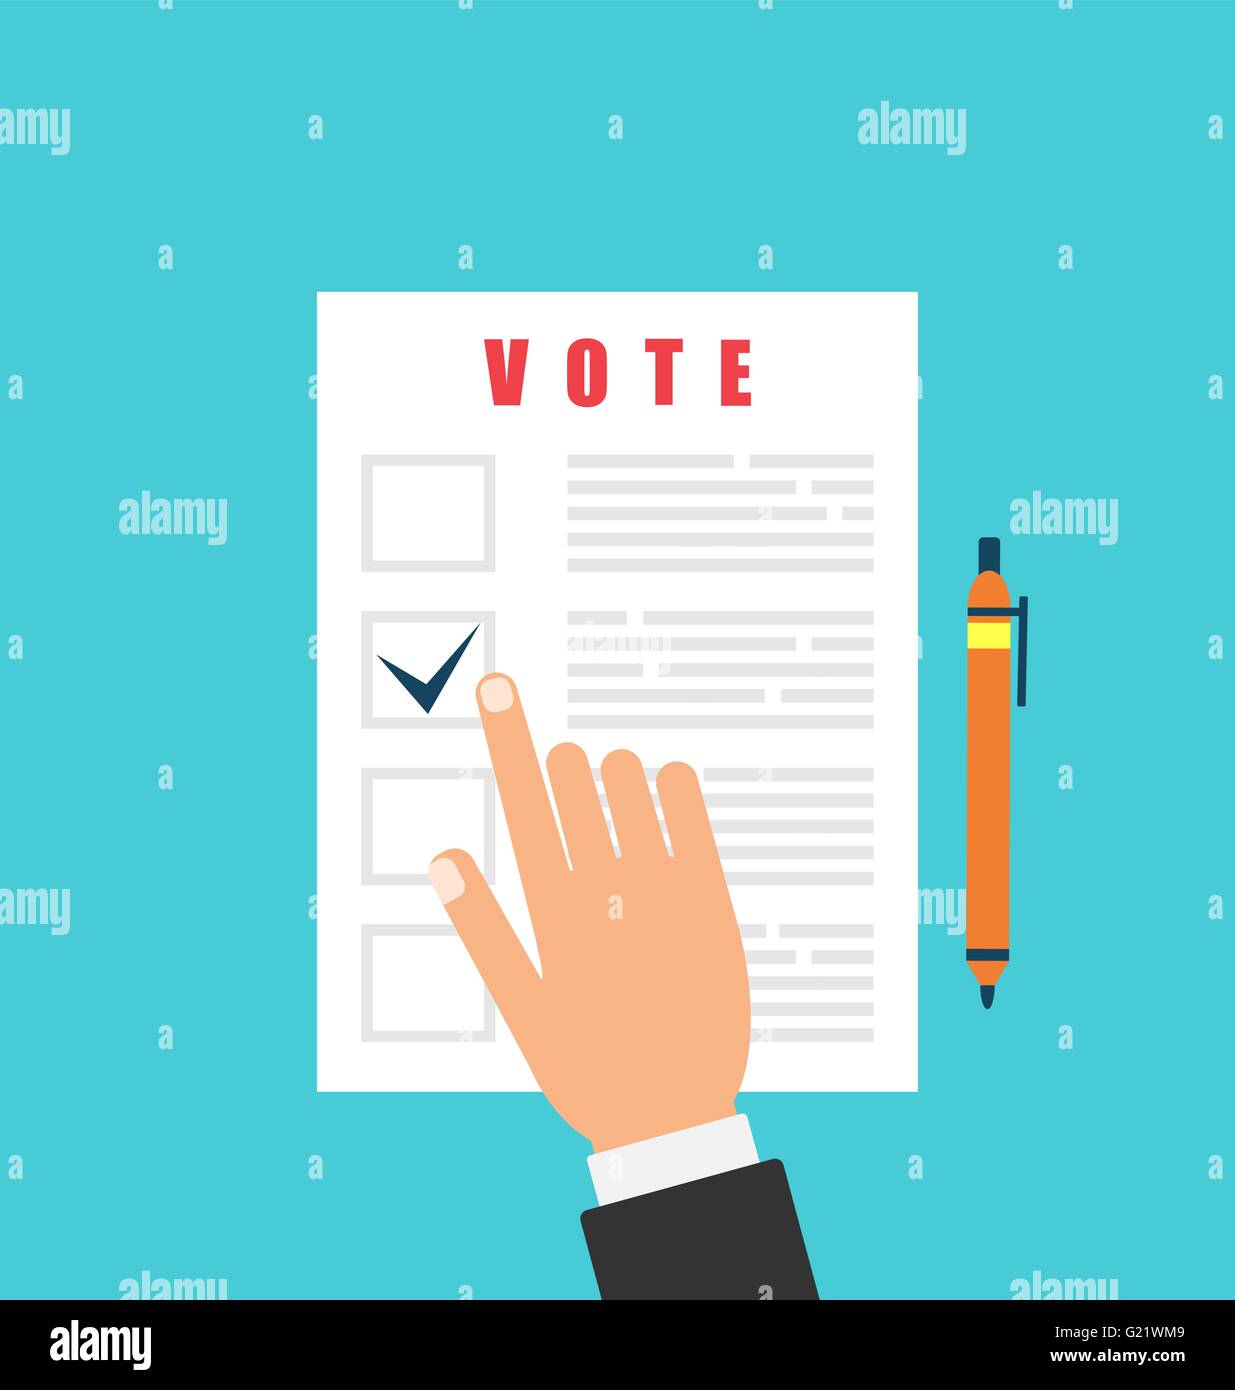 Human and Ballot Papers. Election and Voting Elements Stock Vector